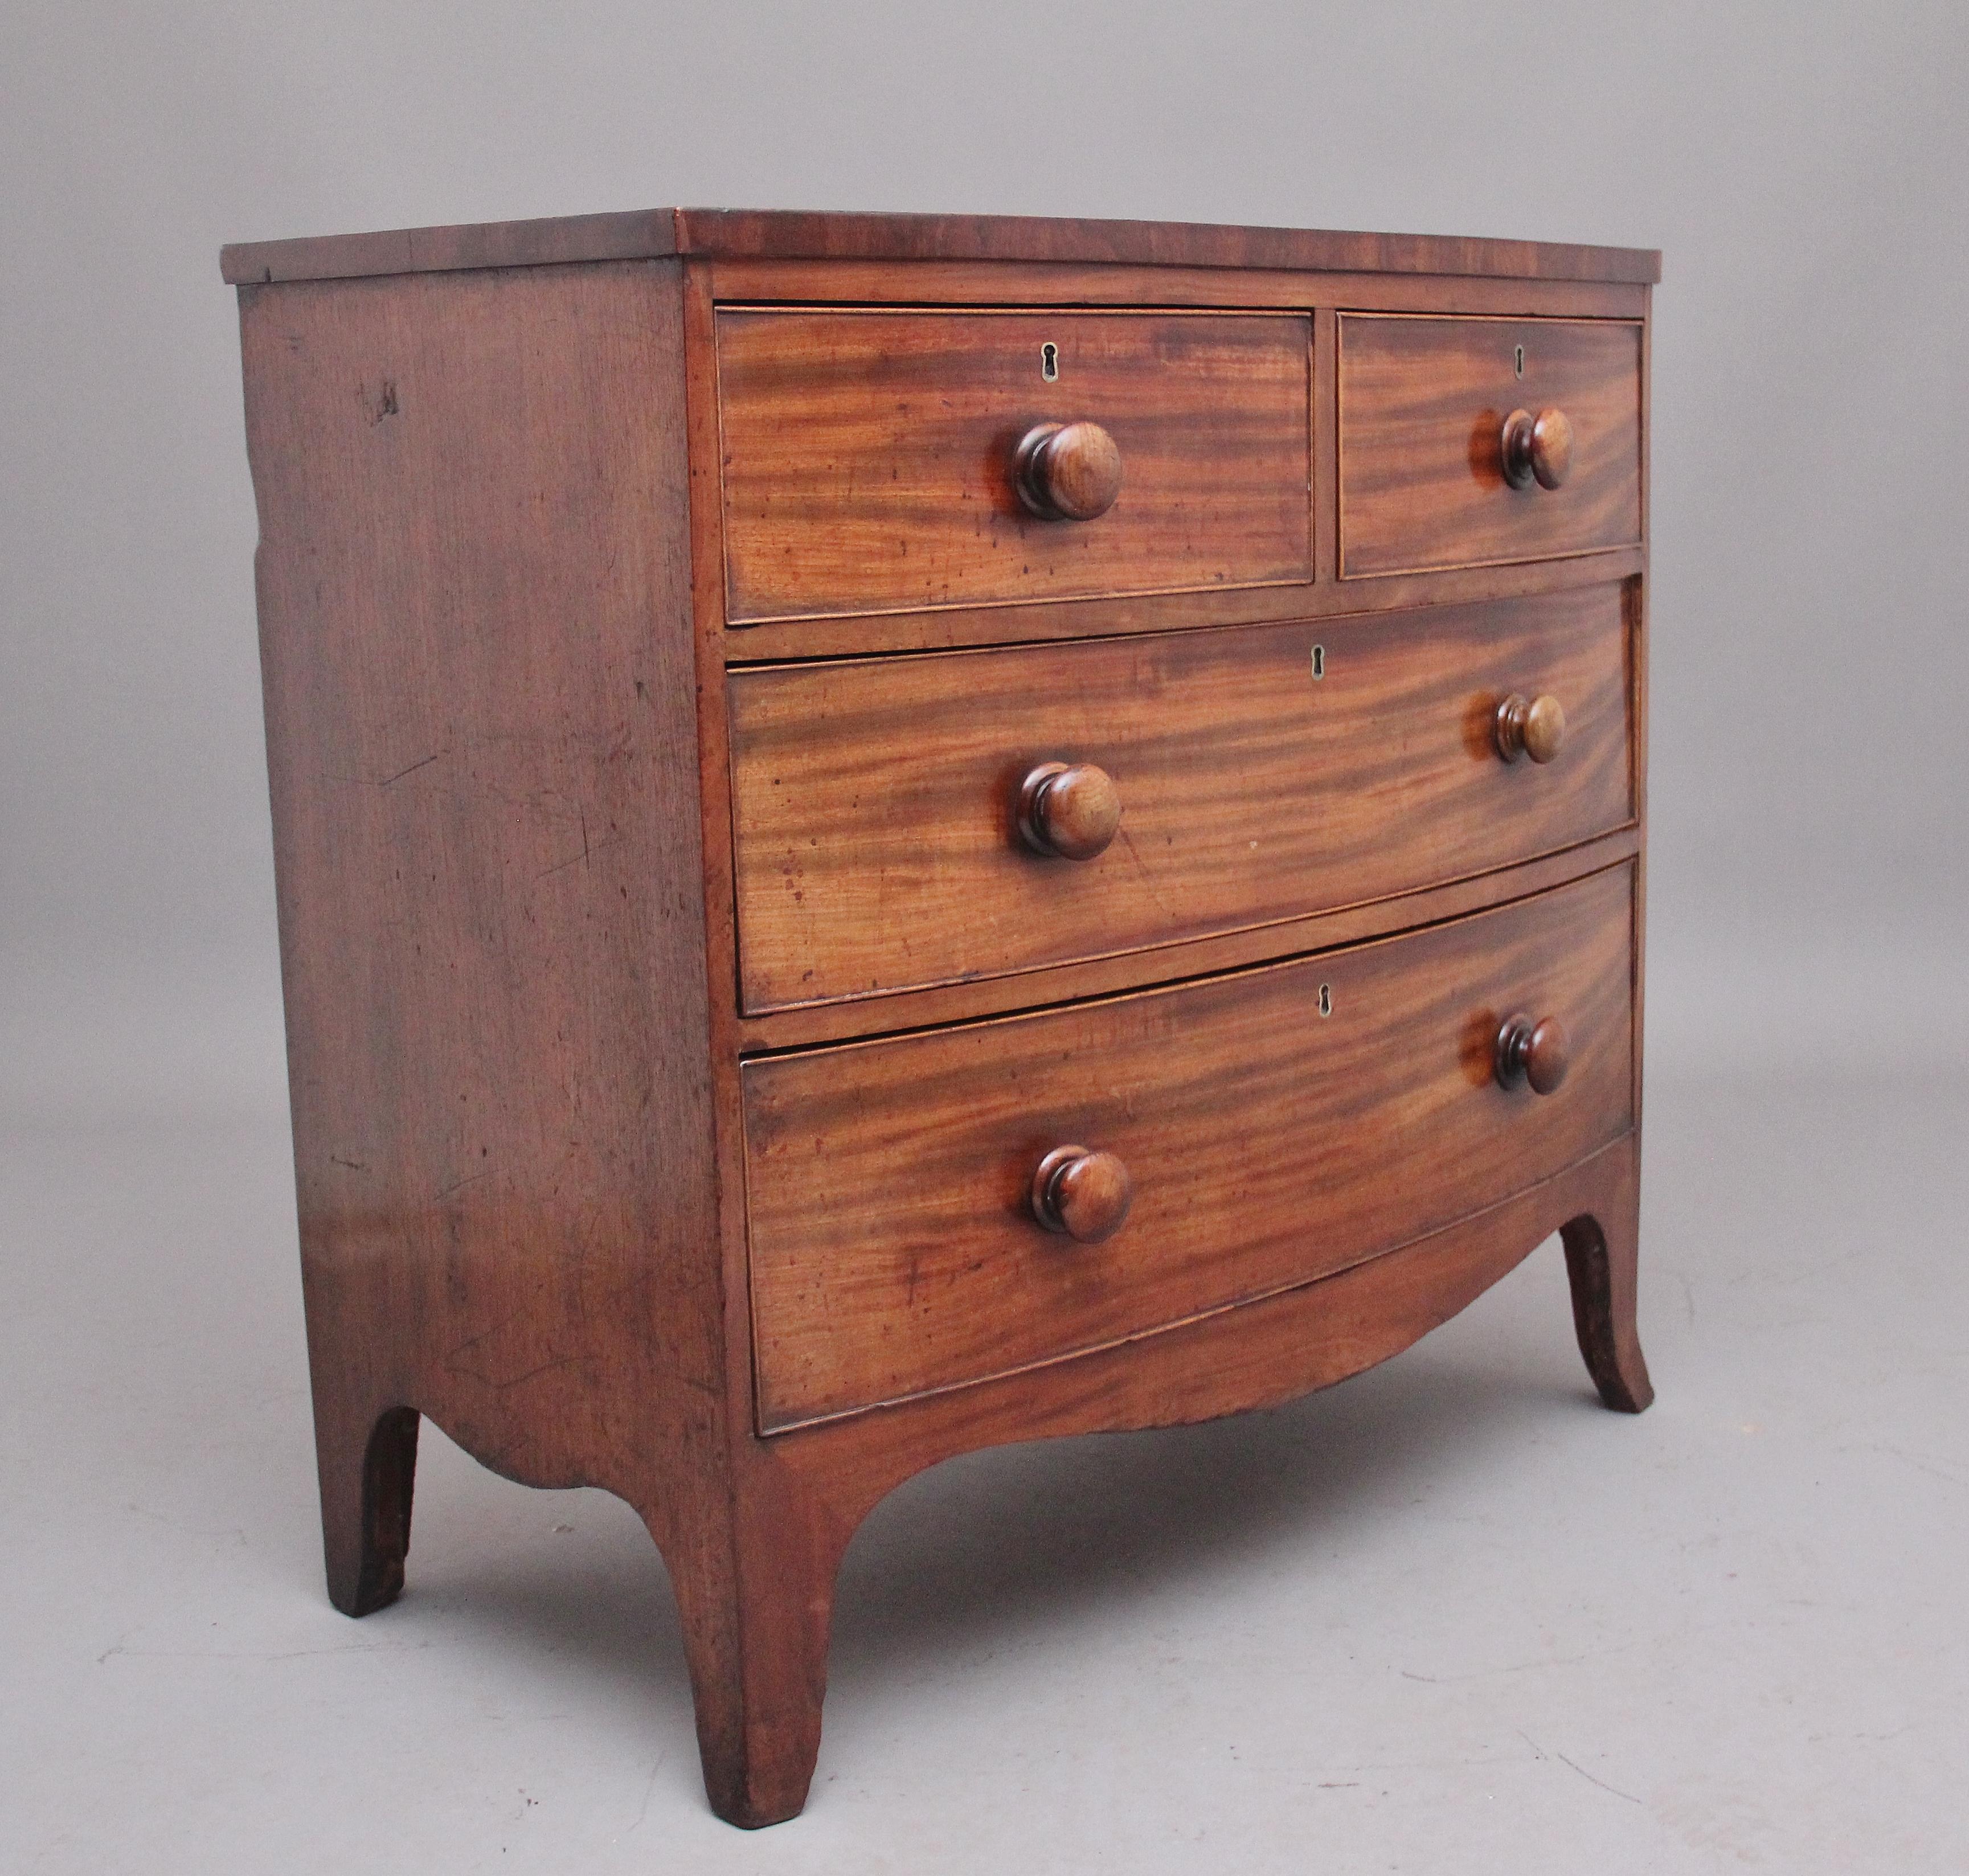 Early 19th century mahogany bowfront chest of drawers of nice proportions, having a nice figured top above a selection of two short over two long oak lined drawers with the original turned wooden knob handles, shaped apron and supported on splay